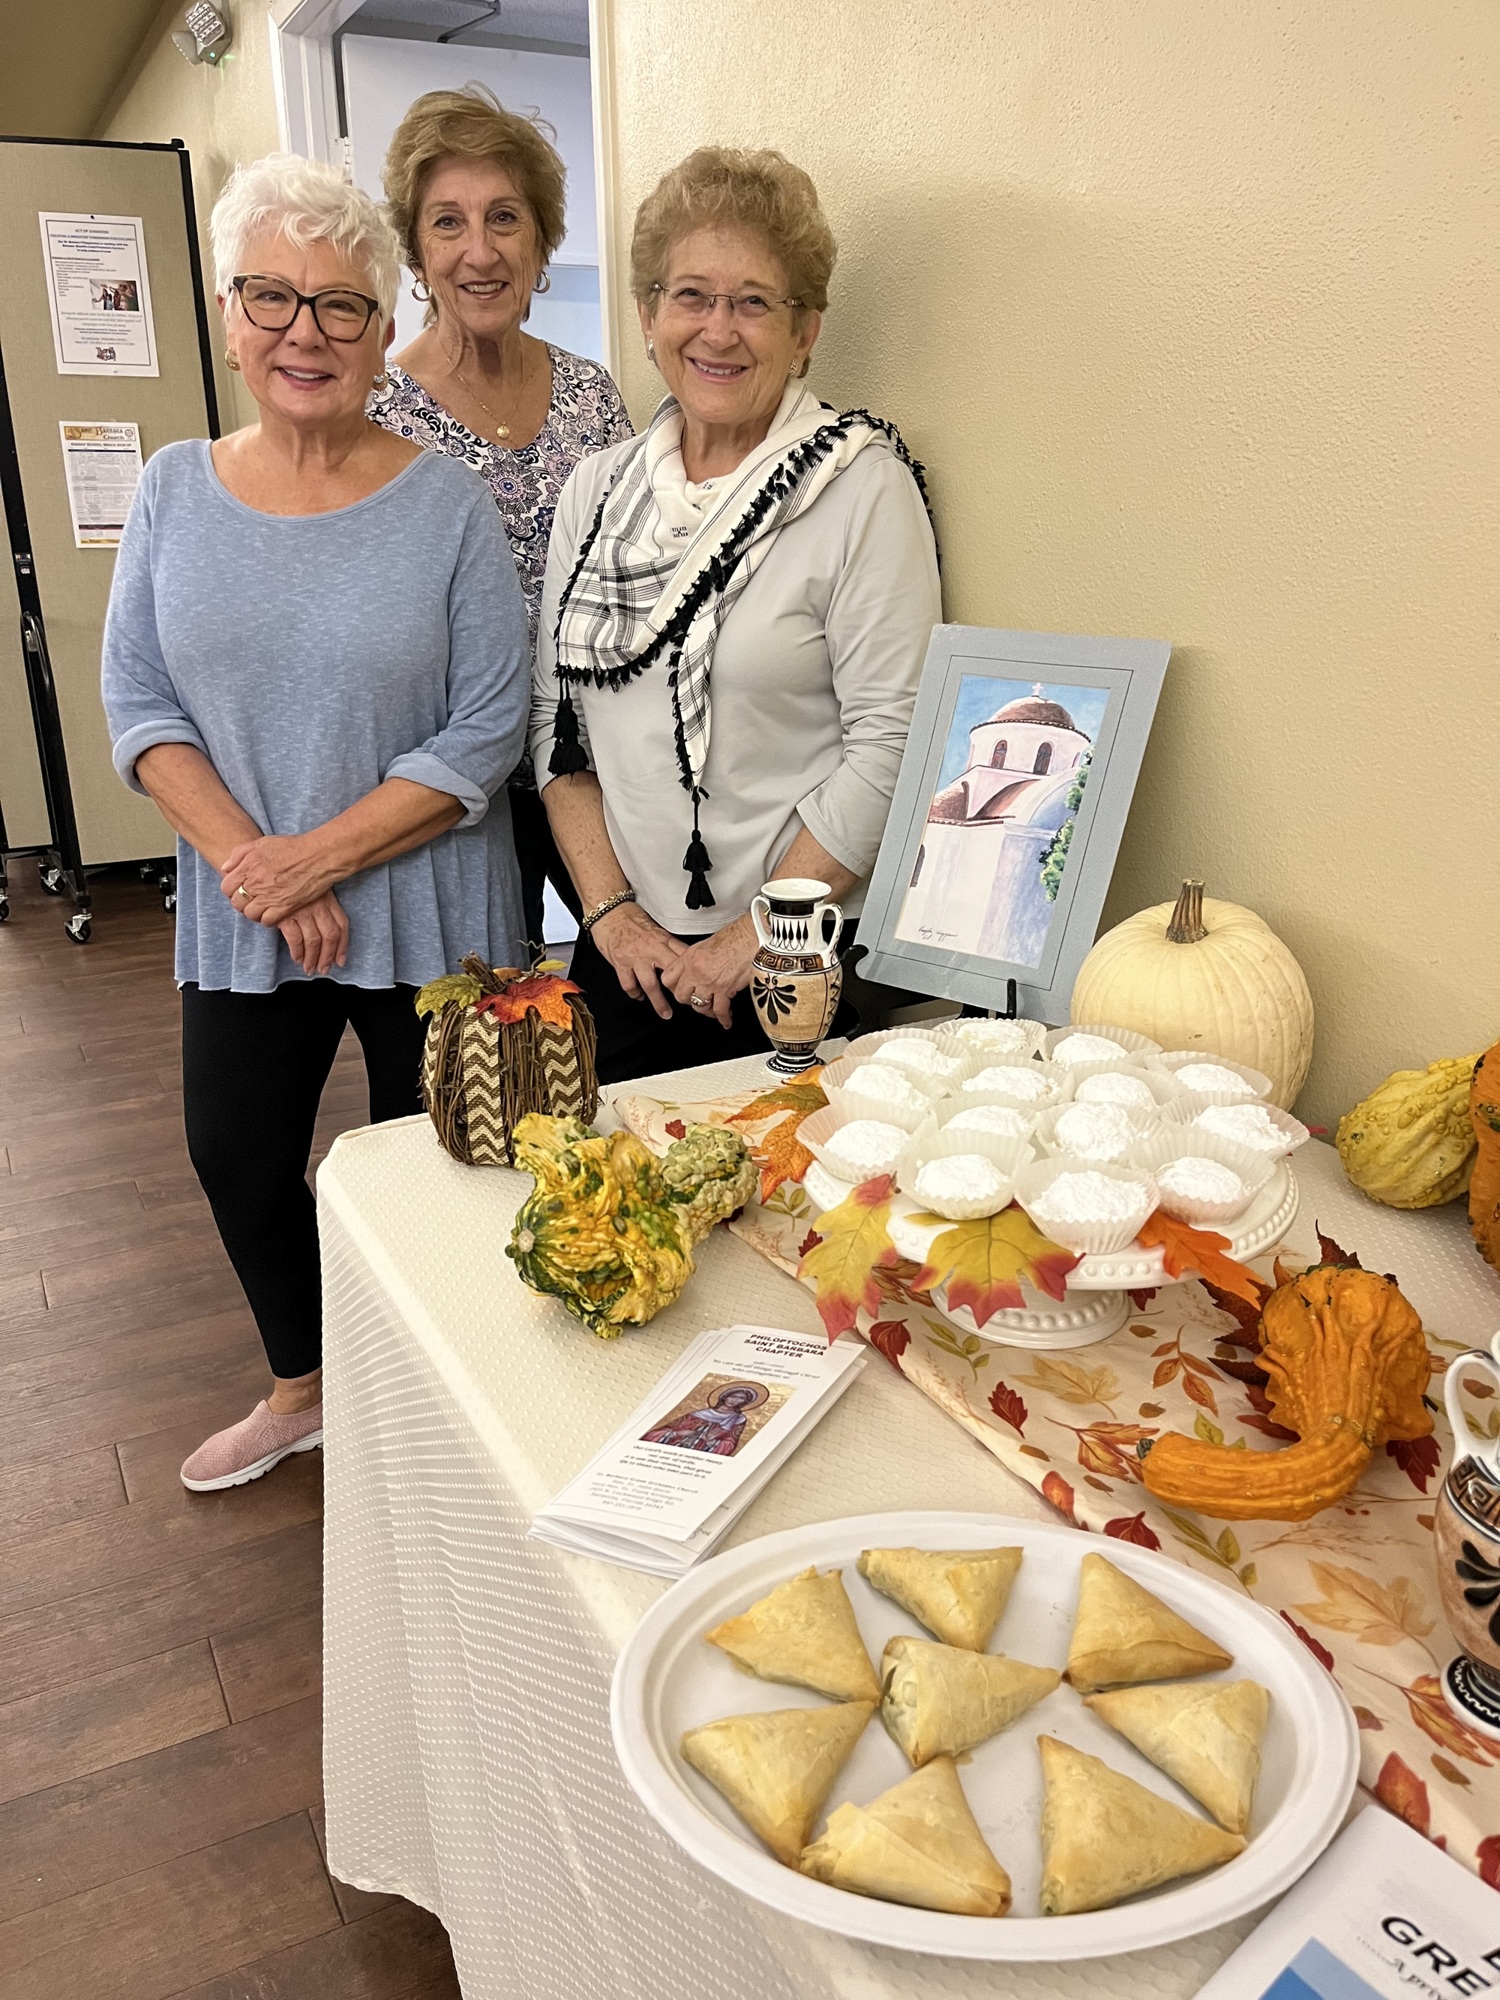 Marilyn Blazakis, the president of the St. Barbara Philoptochos Society, Pat Trempelas, the assistant treasurer, and Maria Kirlangitis, the vice president, can't wait to serve Greek foods and pastries at Autumn Fest.